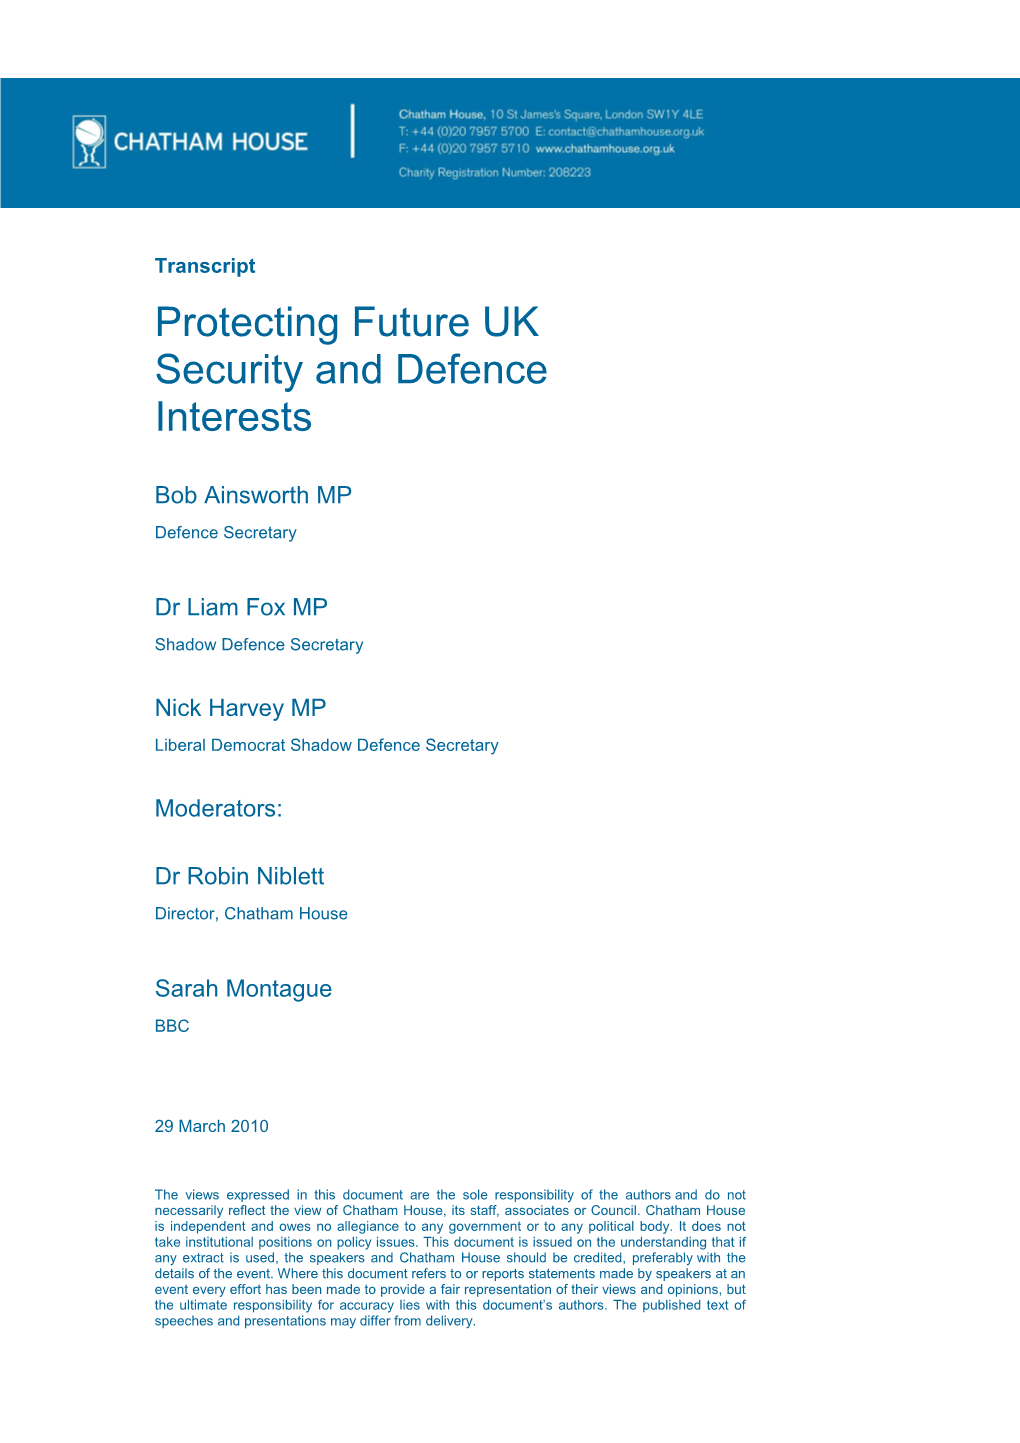 Protecting Future UK Security and Defence Interests